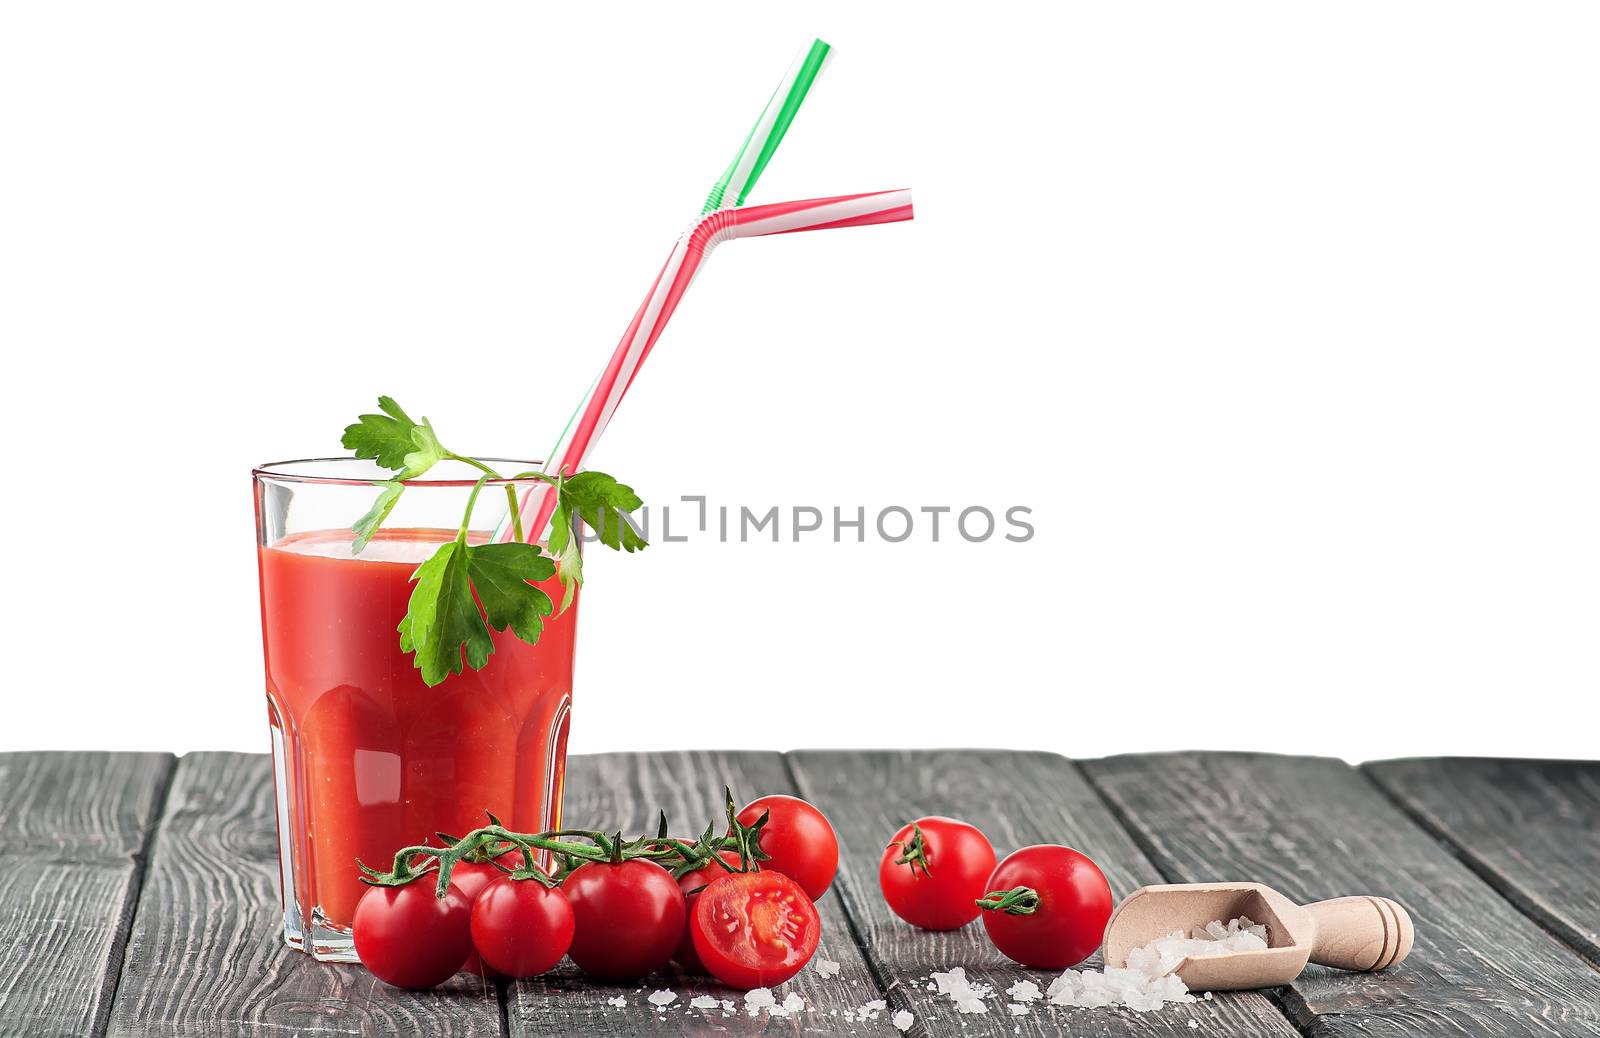 Glass of tomato juice on a wooden table. Salt on a wooden table next to cherry tomatoes. Isolated on white background.